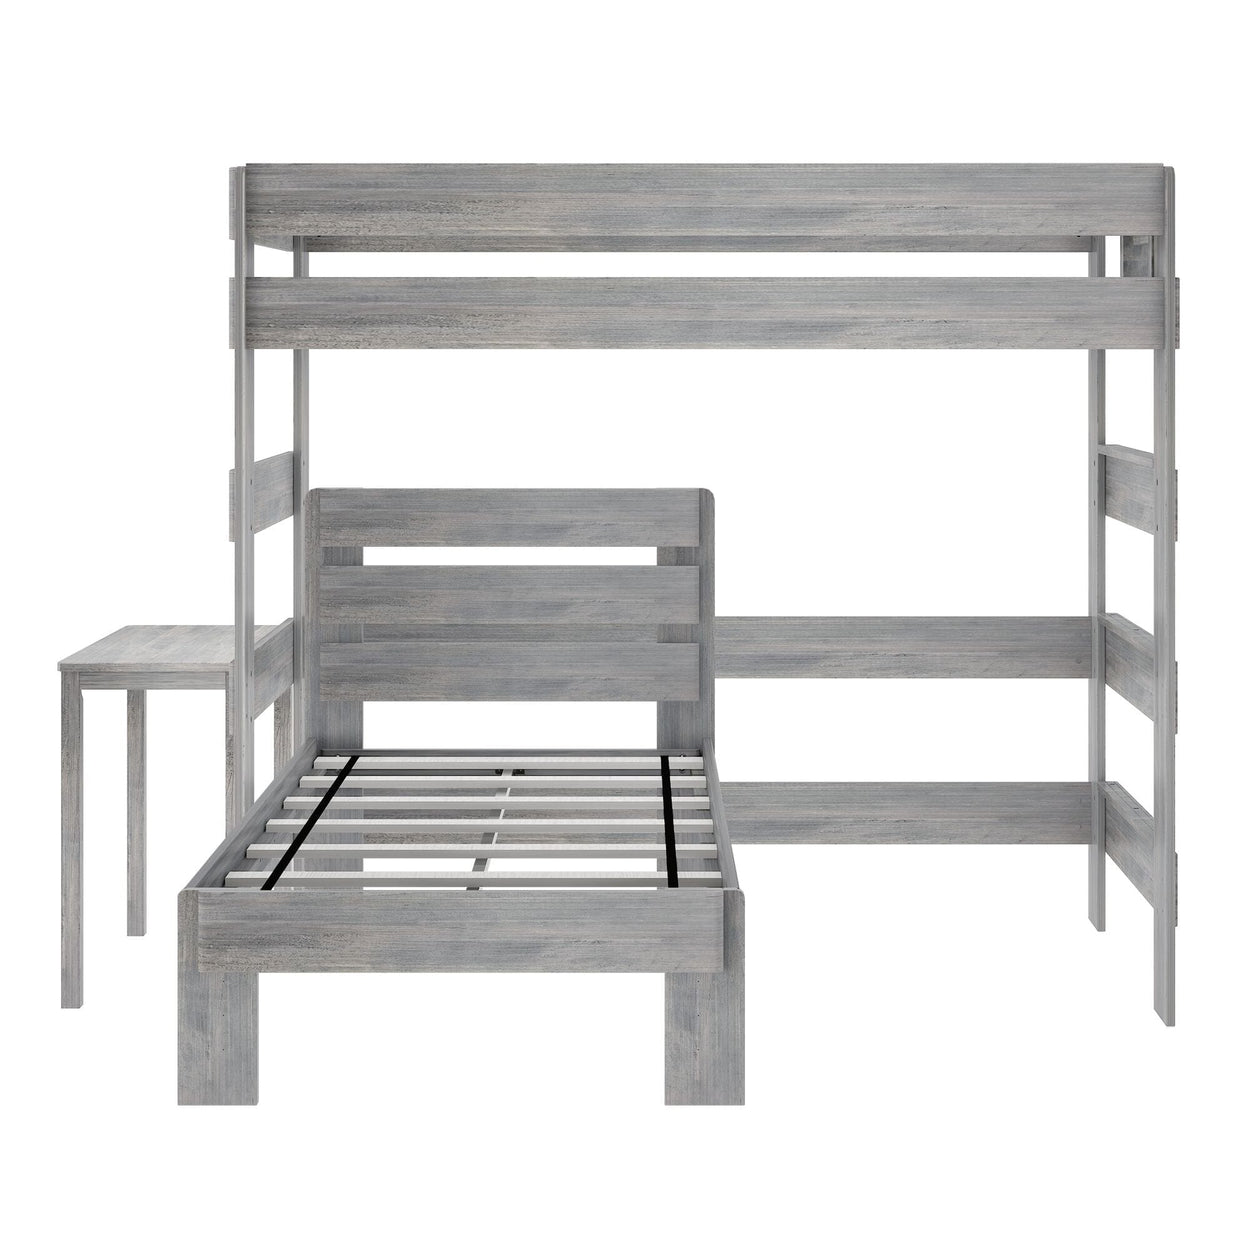 19-801-185 : Bunk Beds Farmhouse Twin over Twin L-Shaped Bunk Bed with Desk, Driftwood